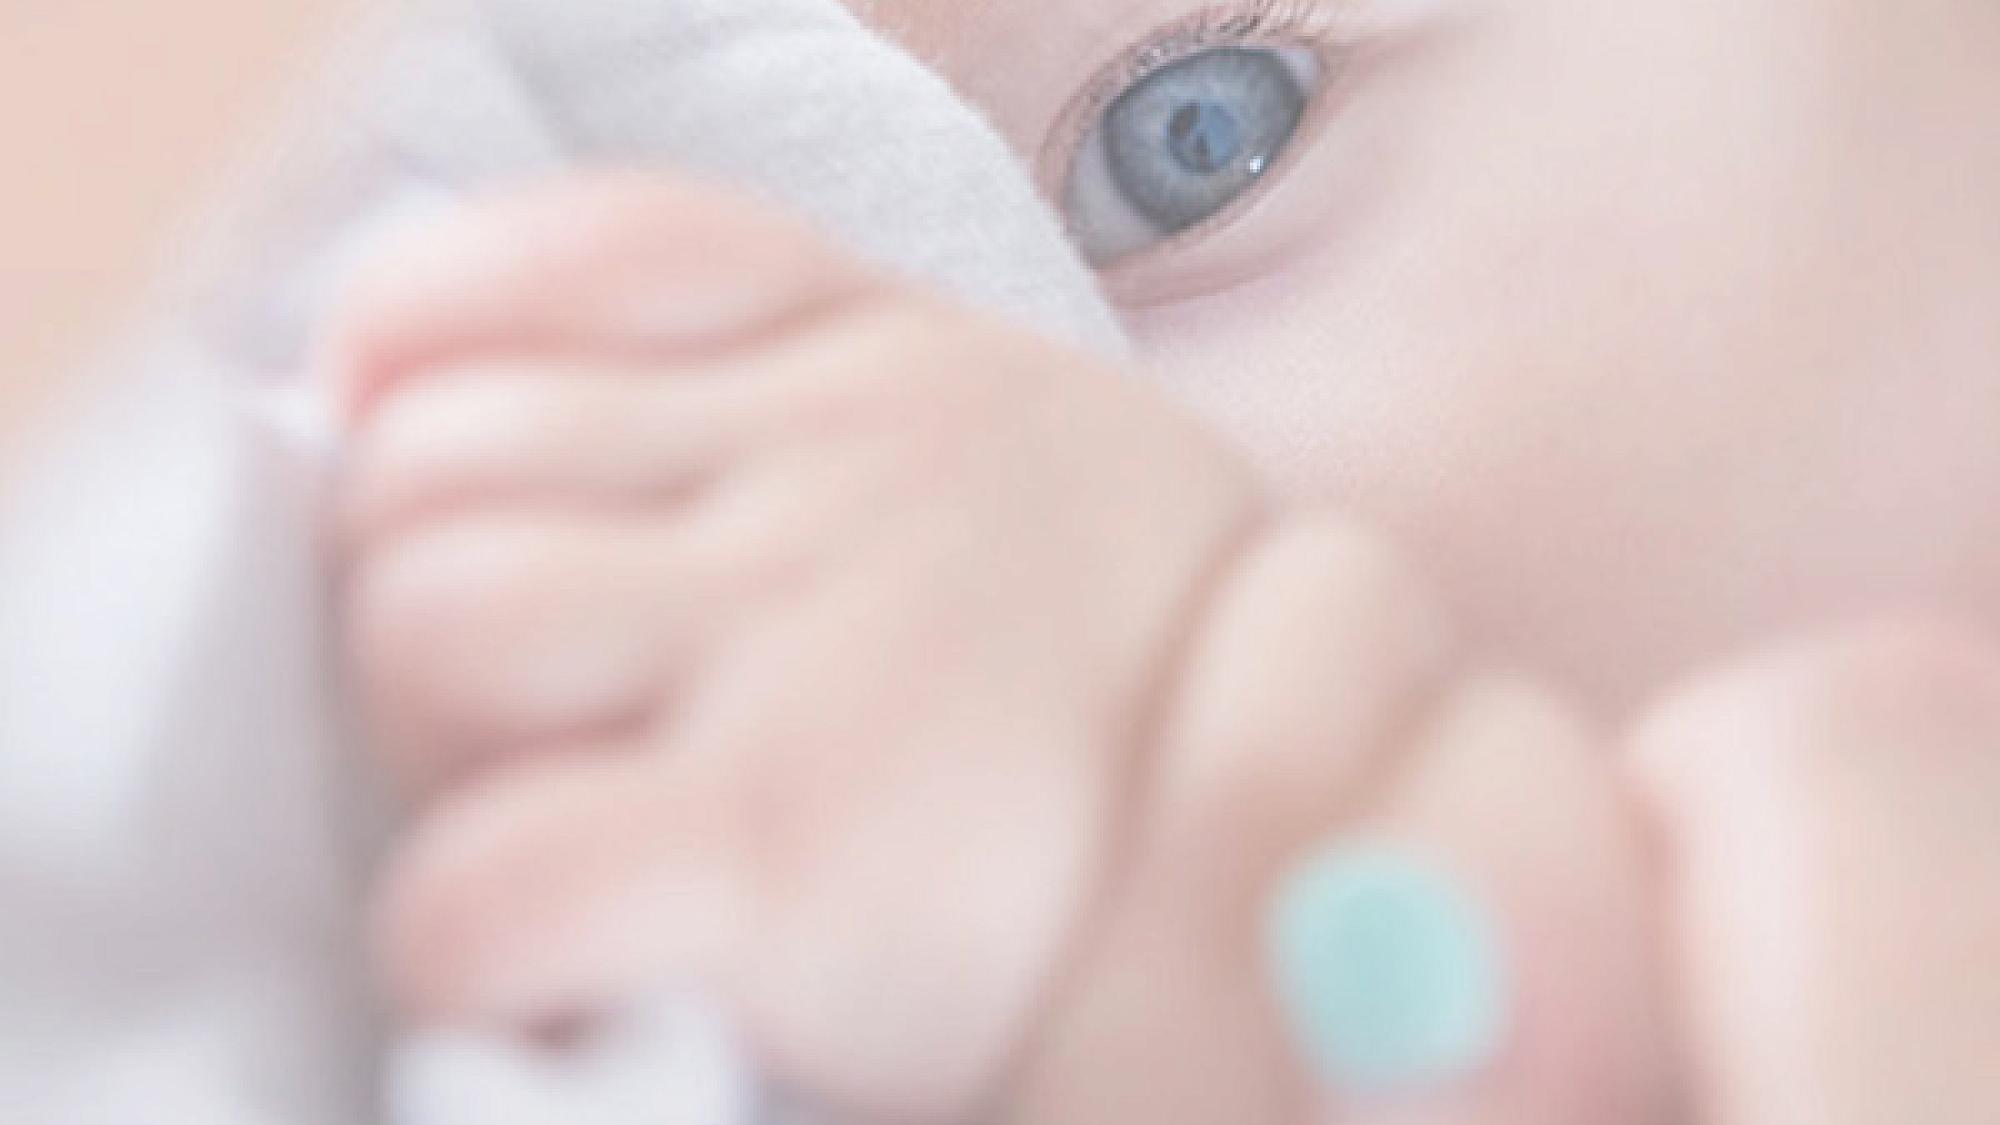 Close up of a baby's eye and hand